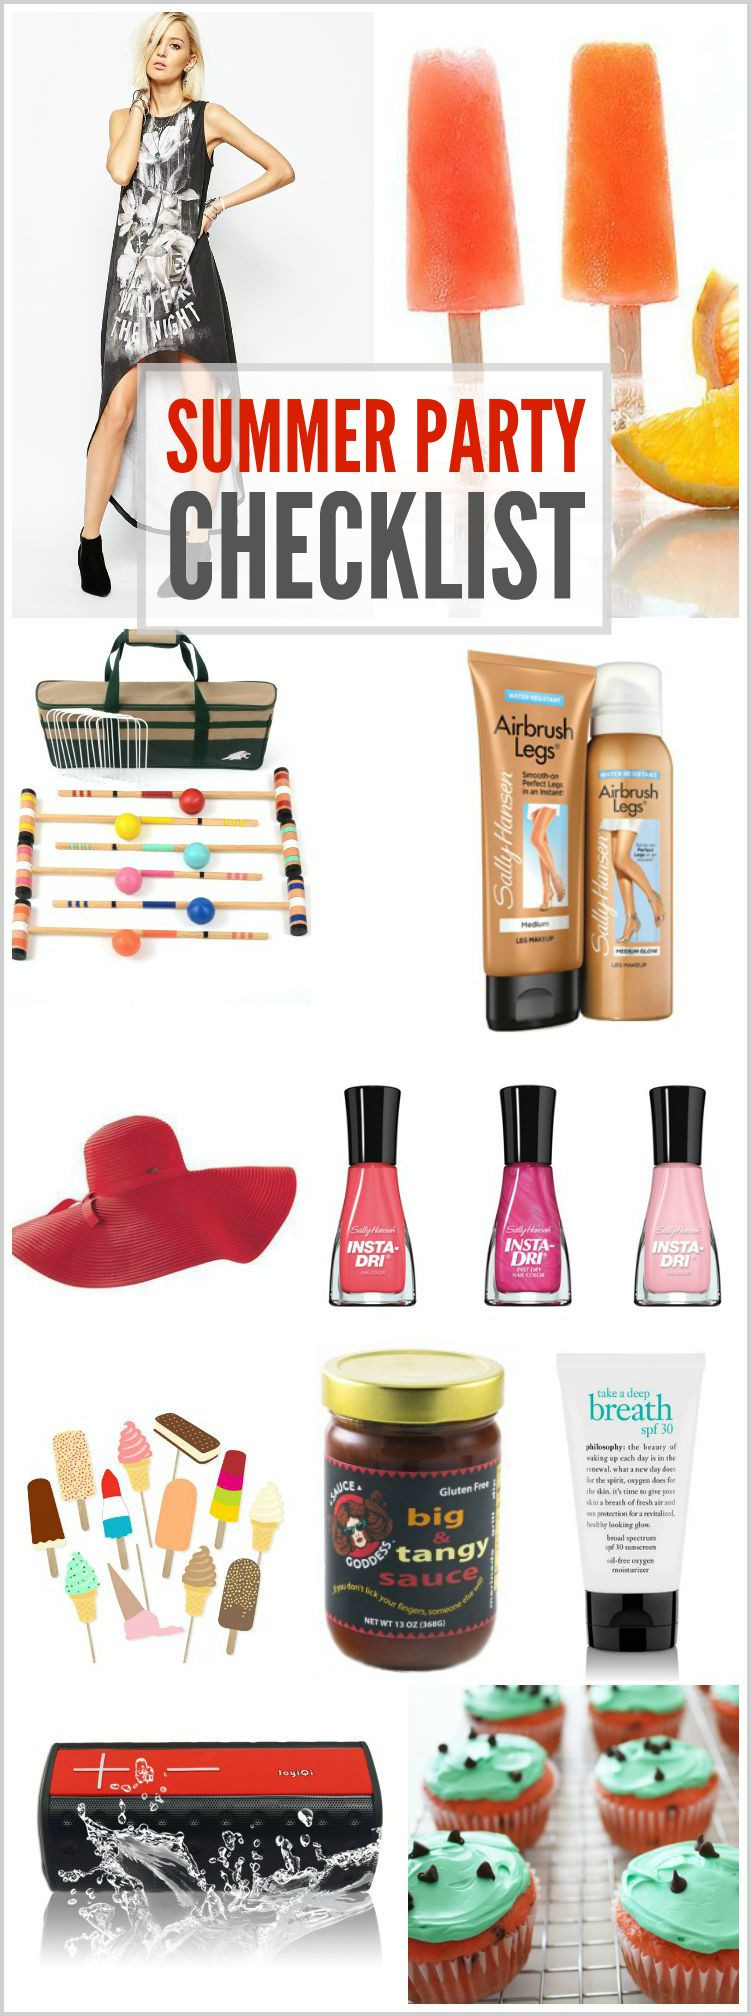 Summer Giveaways Ideas
 Easy Summer Party Ideas Sally Hansen Giveaway